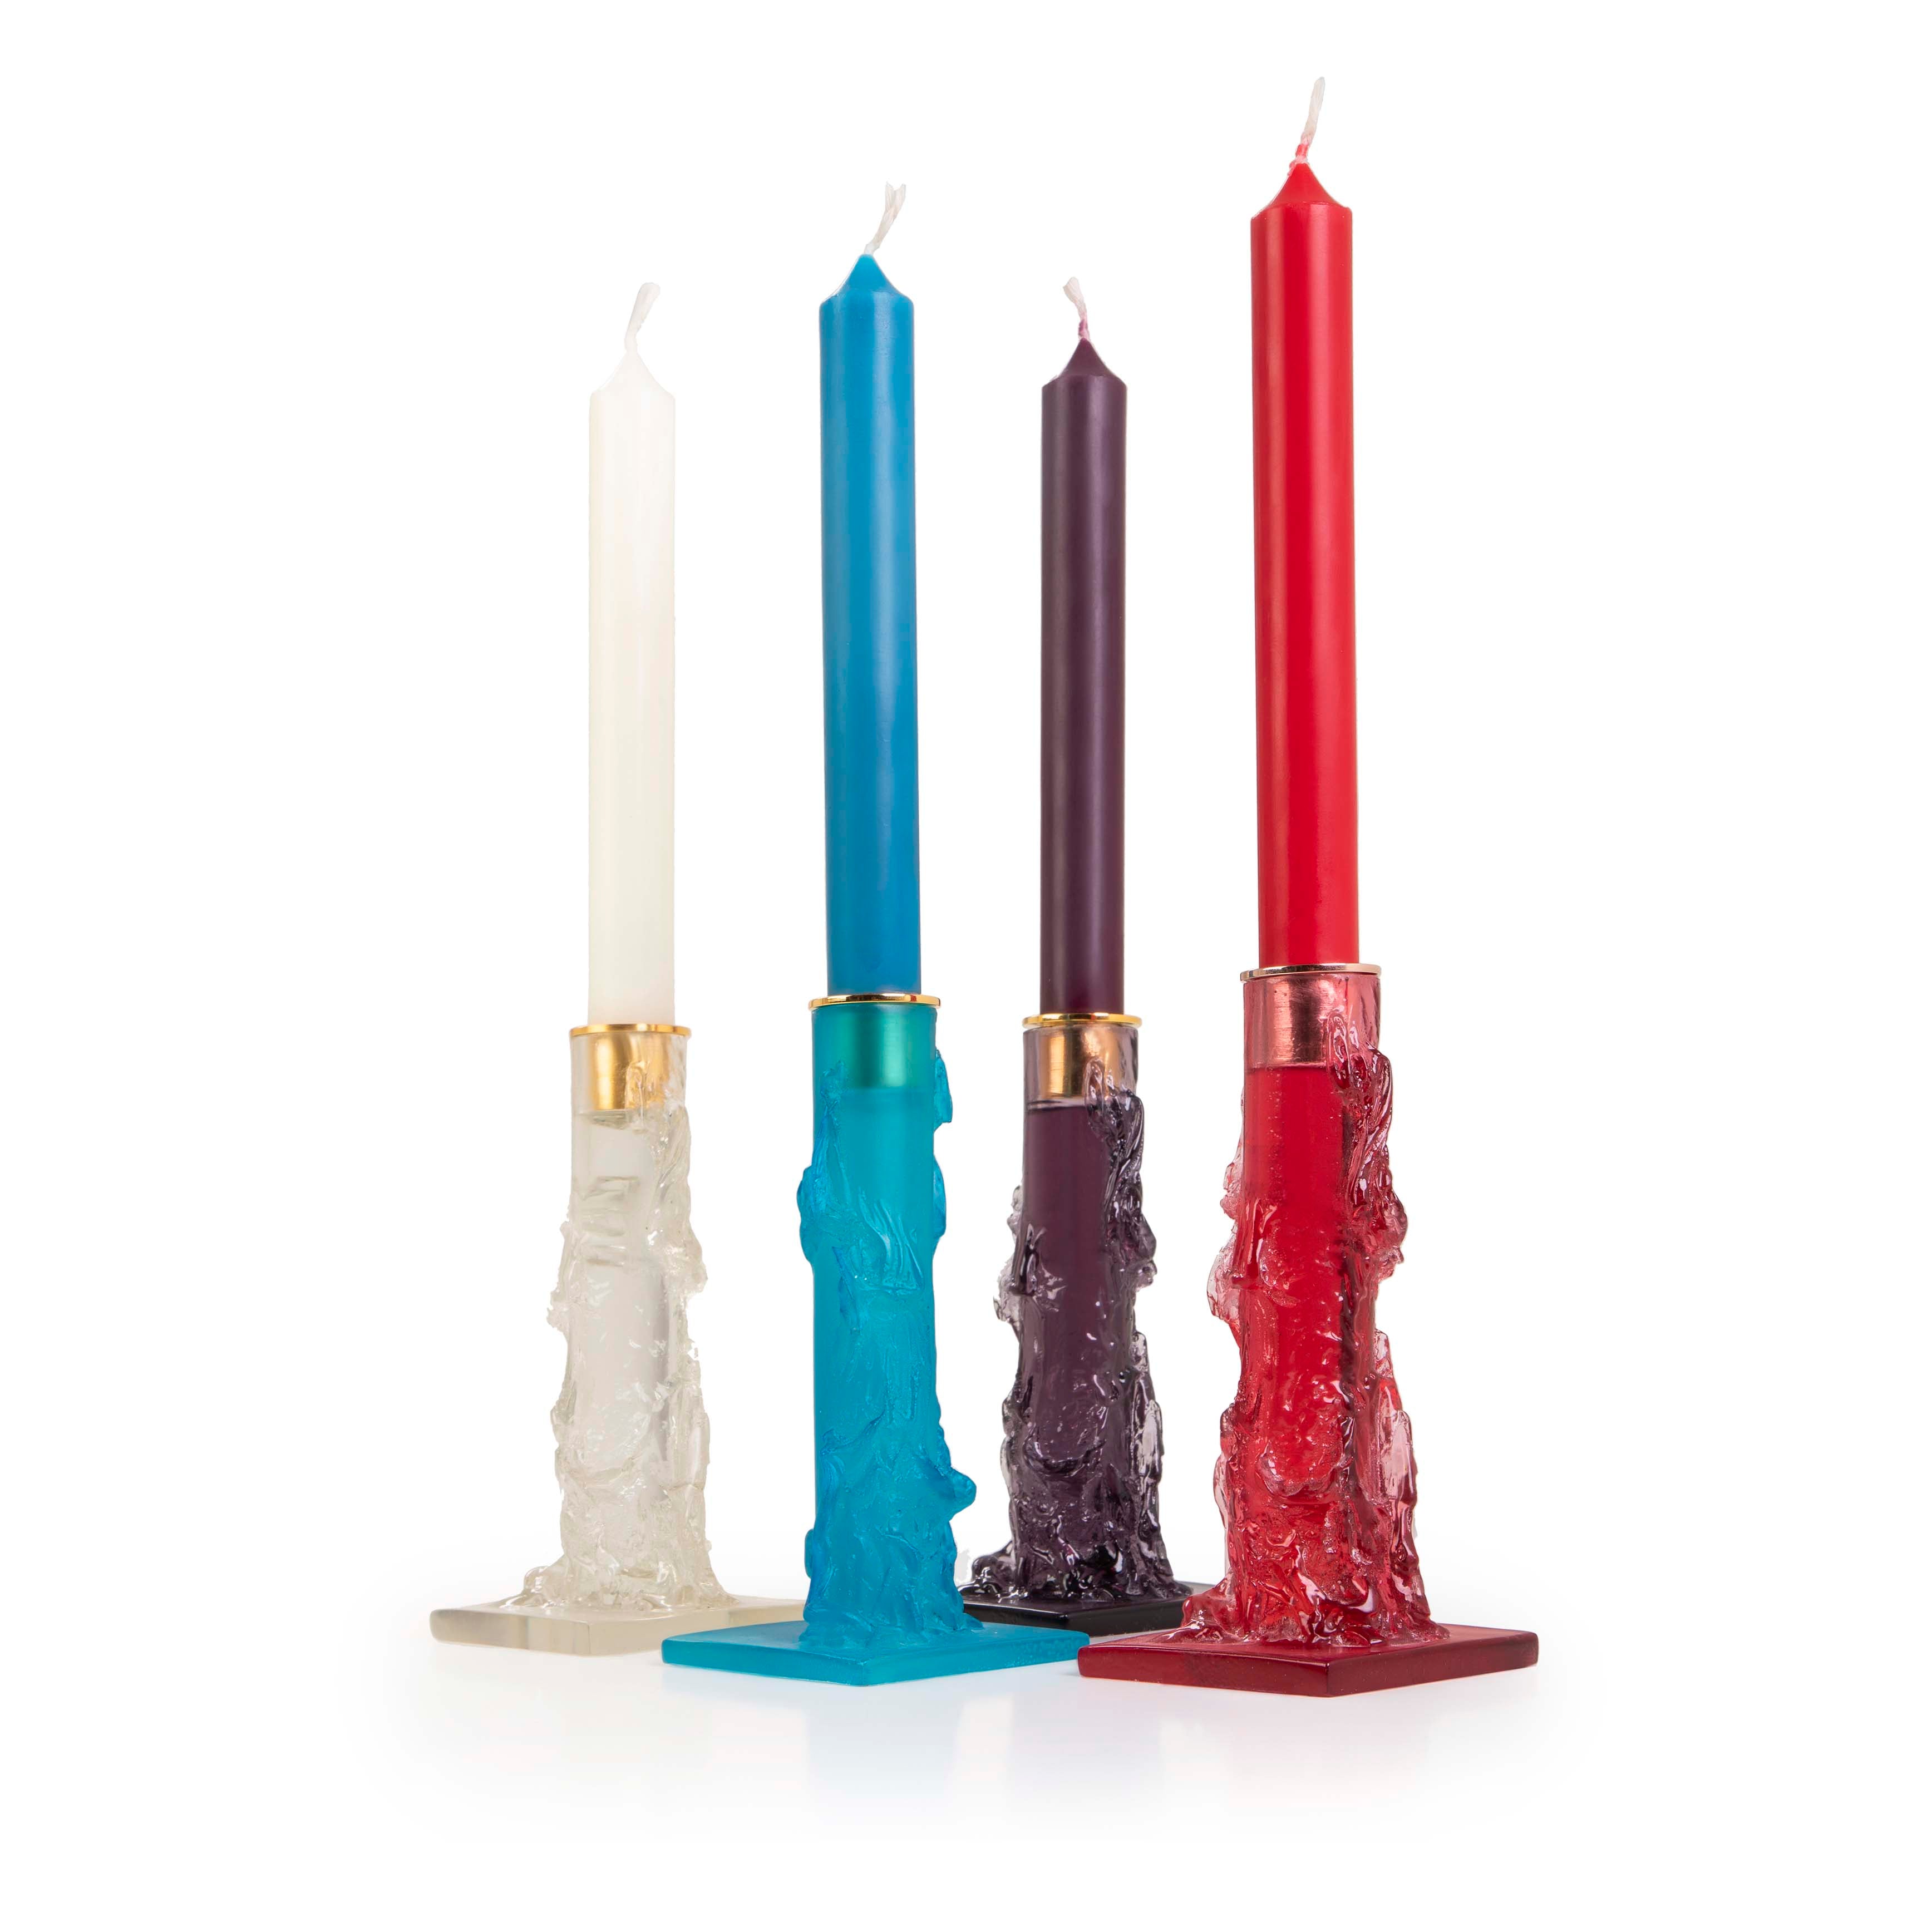 Resin Candle Holder with Insert